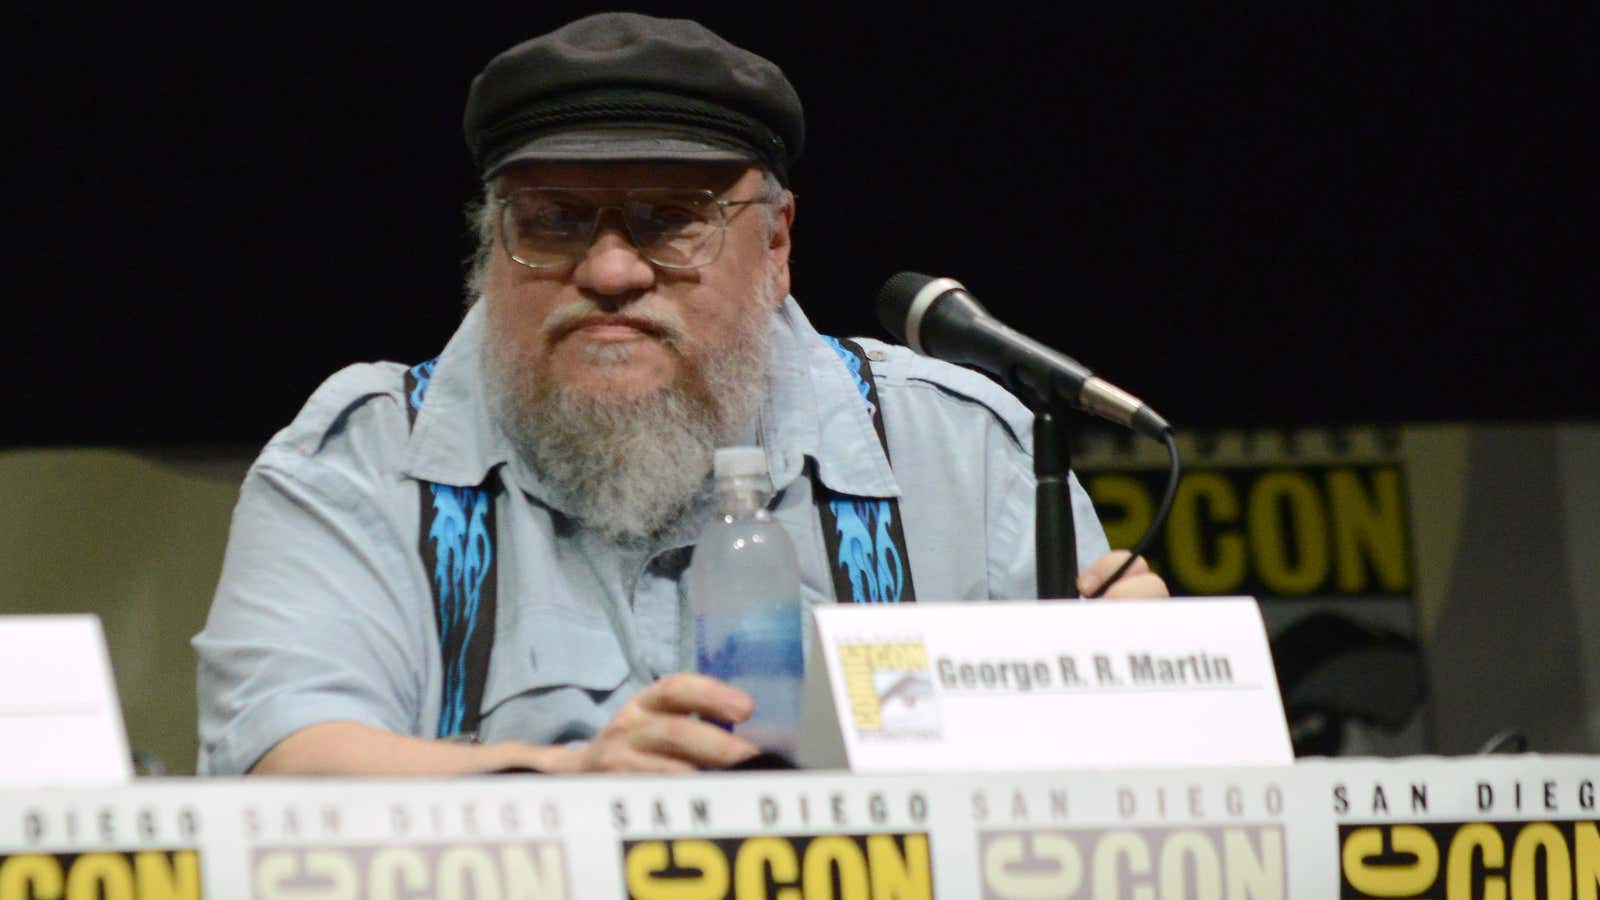 George R.R. Martin has released no “Game of Thrones” books since this photo was taken in 2013.